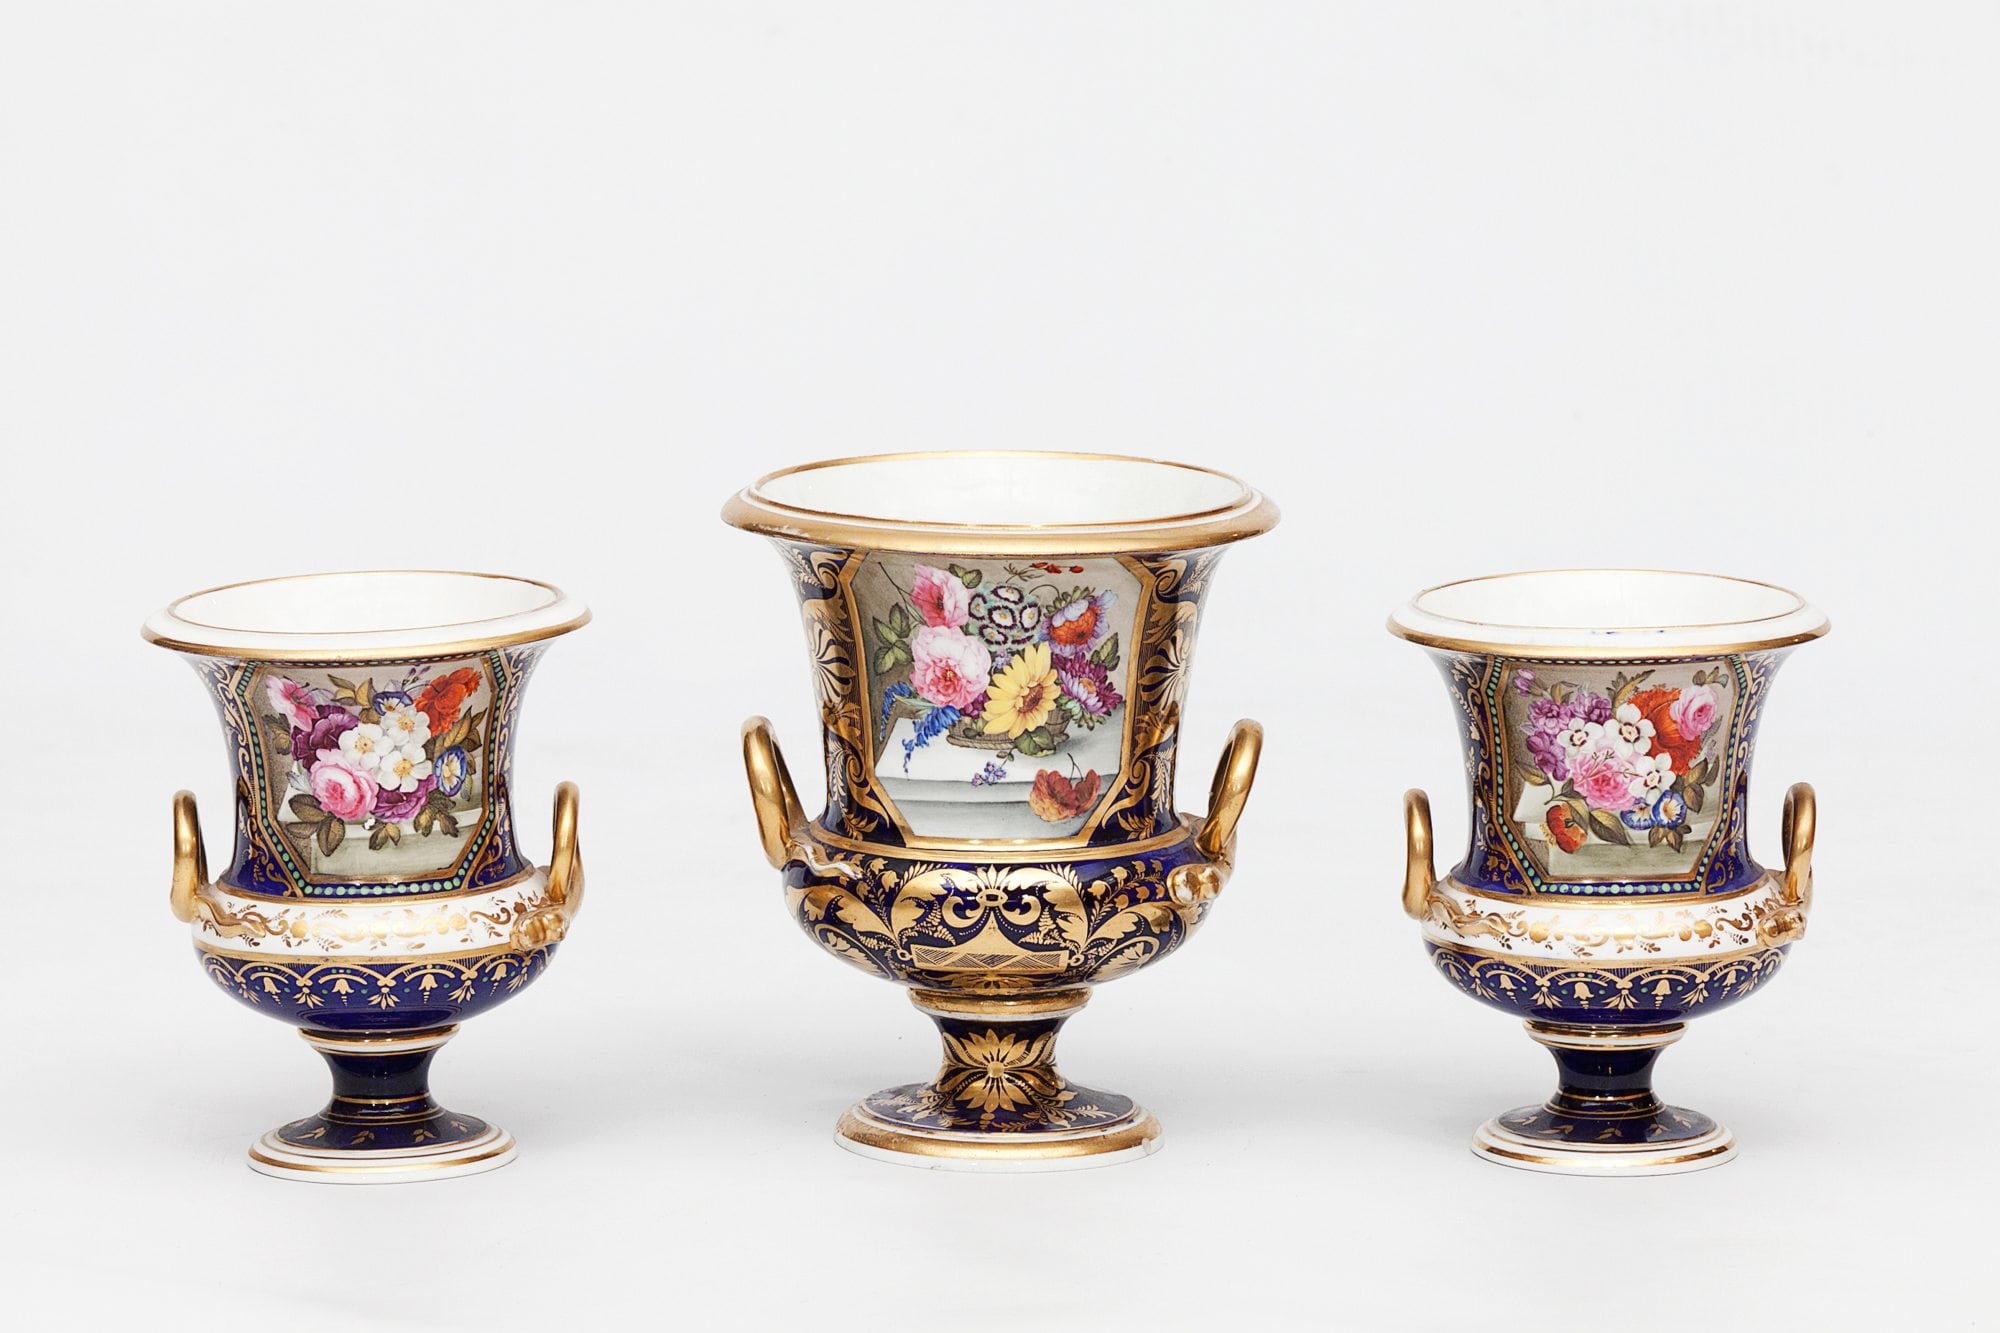 Early 19th Century Crown Derby Porcelain Trio of Twin Handled Vases